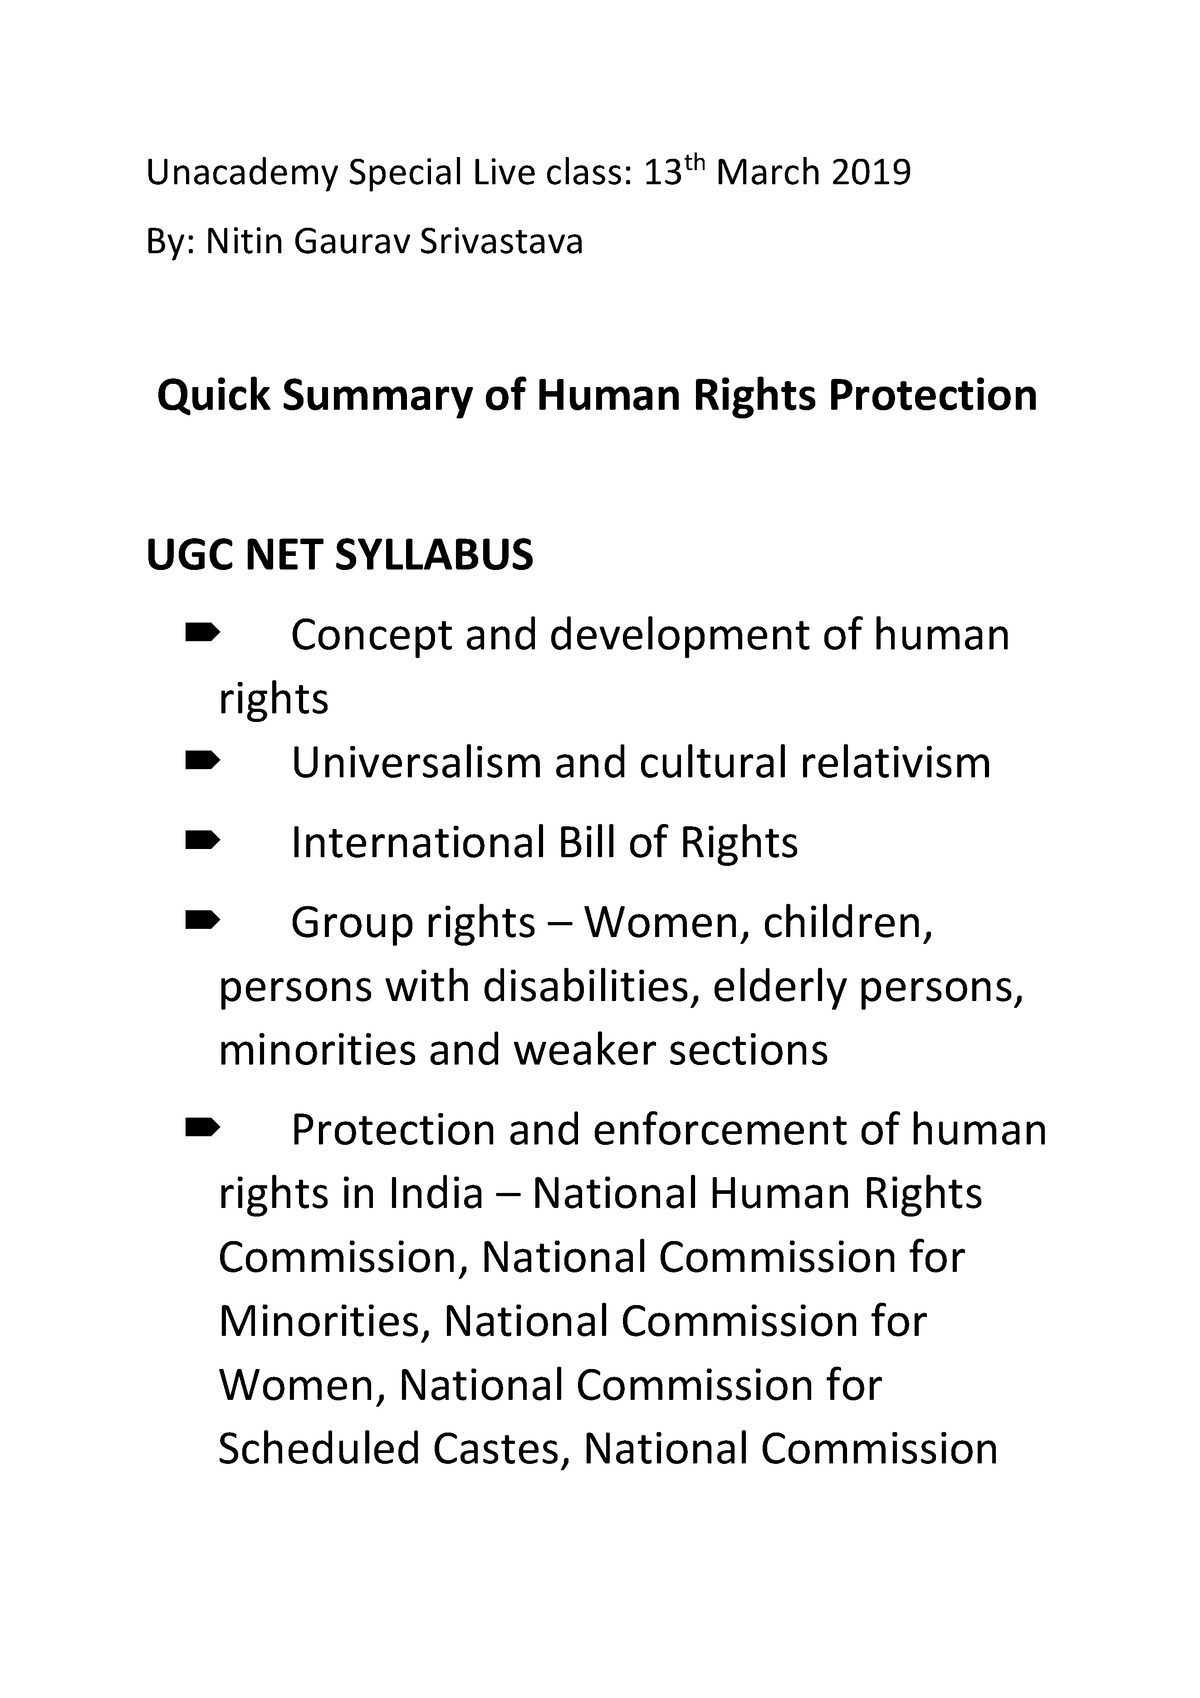 Human Rights Special Class Unacademy Special Live Class 13th March 2019 Nitin Gaurav